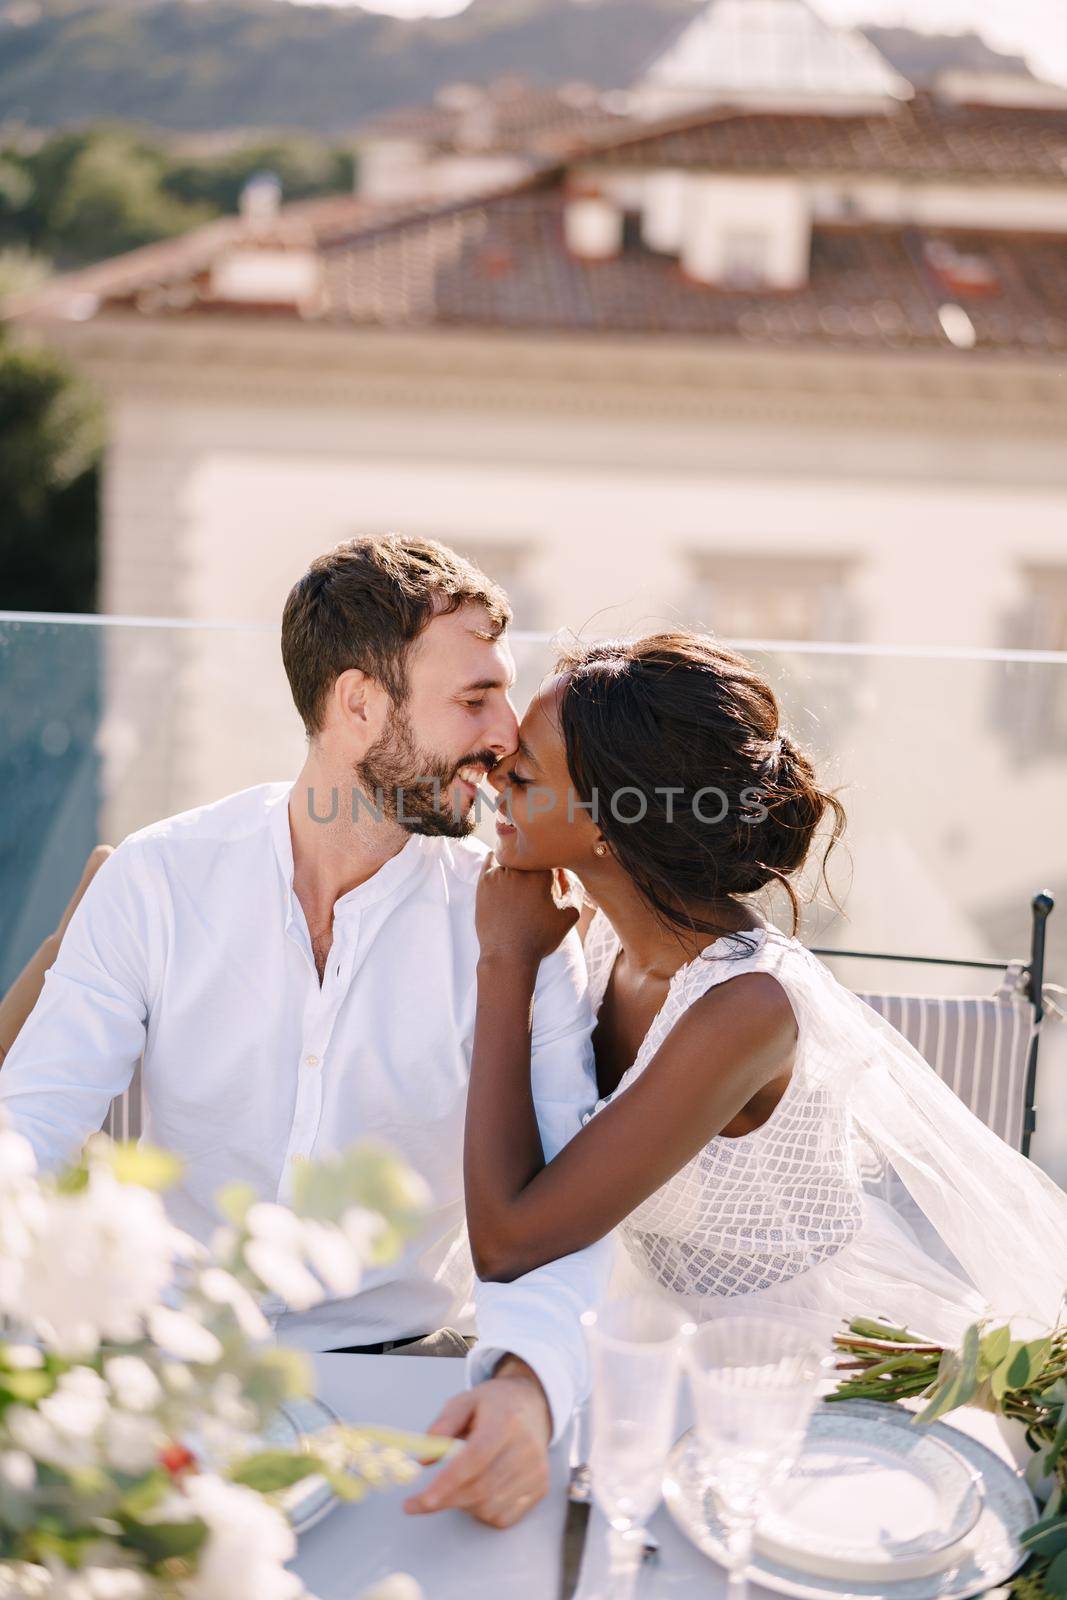 Interracial wedding couple. Destination fine-art wedding in Florence, Italy. African-American bride and Caucasian groom are sitting at the rooftop wedding dinner table overlooking the city. by Nadtochiy